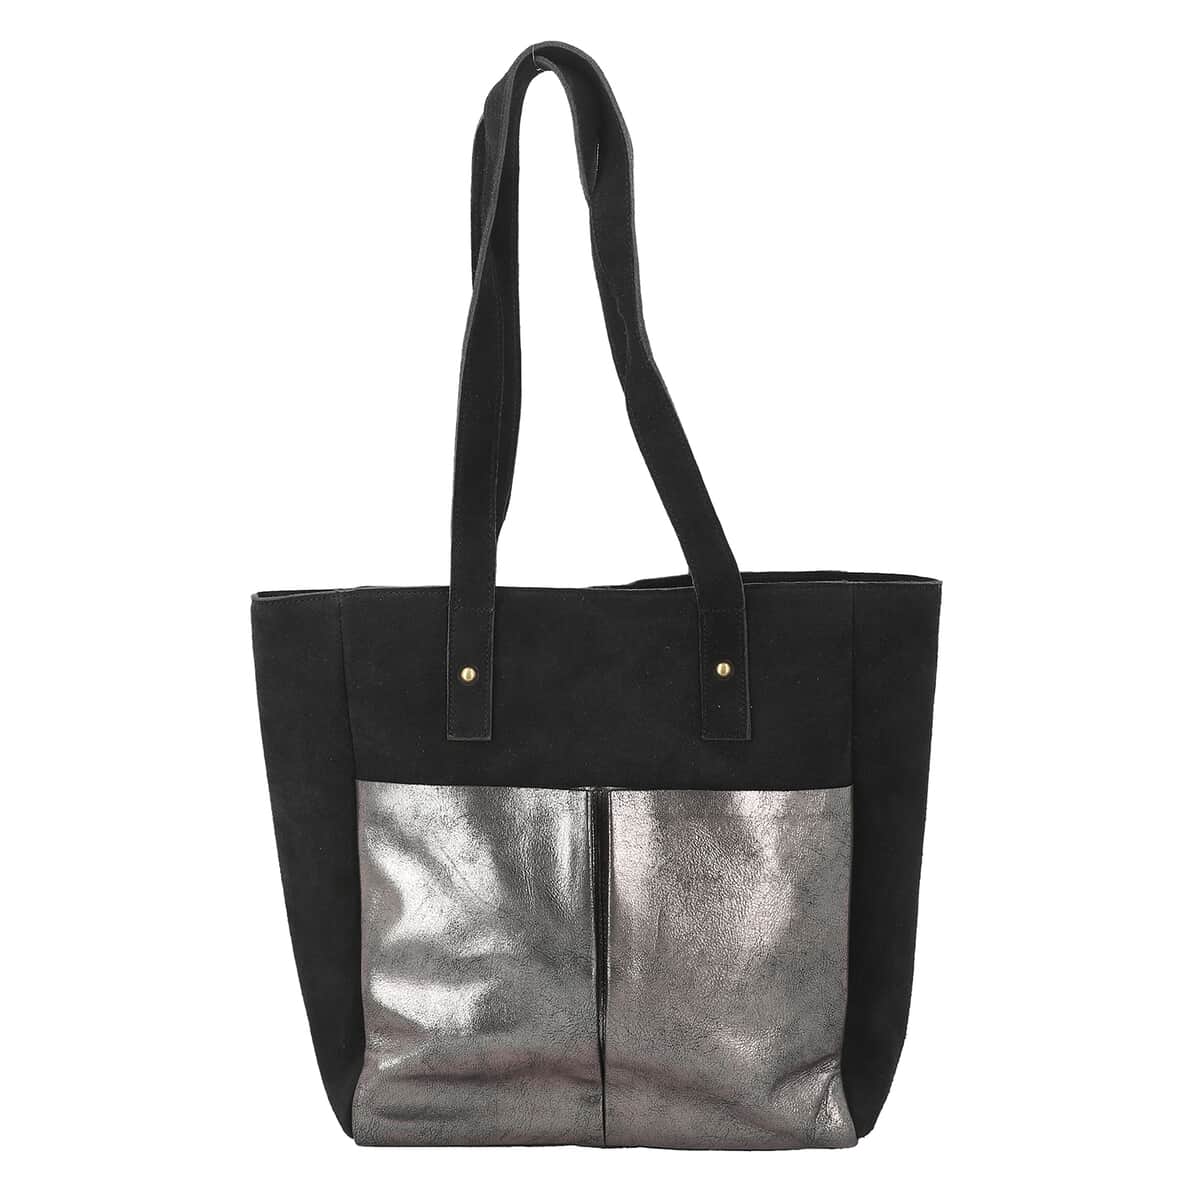 "100% Genuine Leather Tote Bag Color:Black Size: 11.5Lx13Hx4W INCH" image number 0